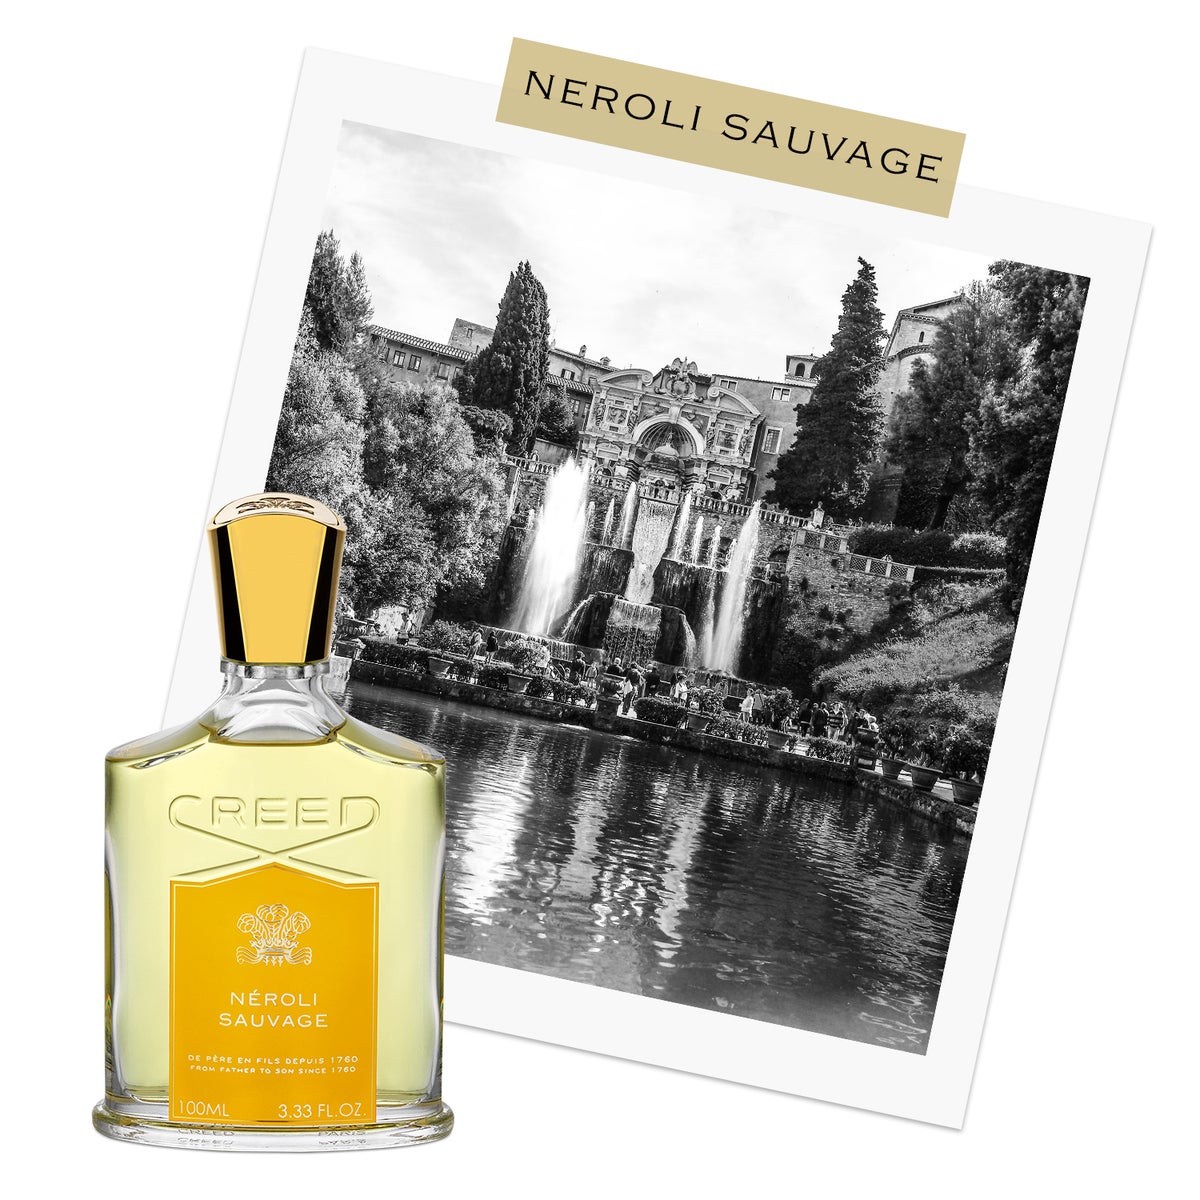 Neroli Sauvage bottle infront of black & white postcard of water fountains in garden in Rome